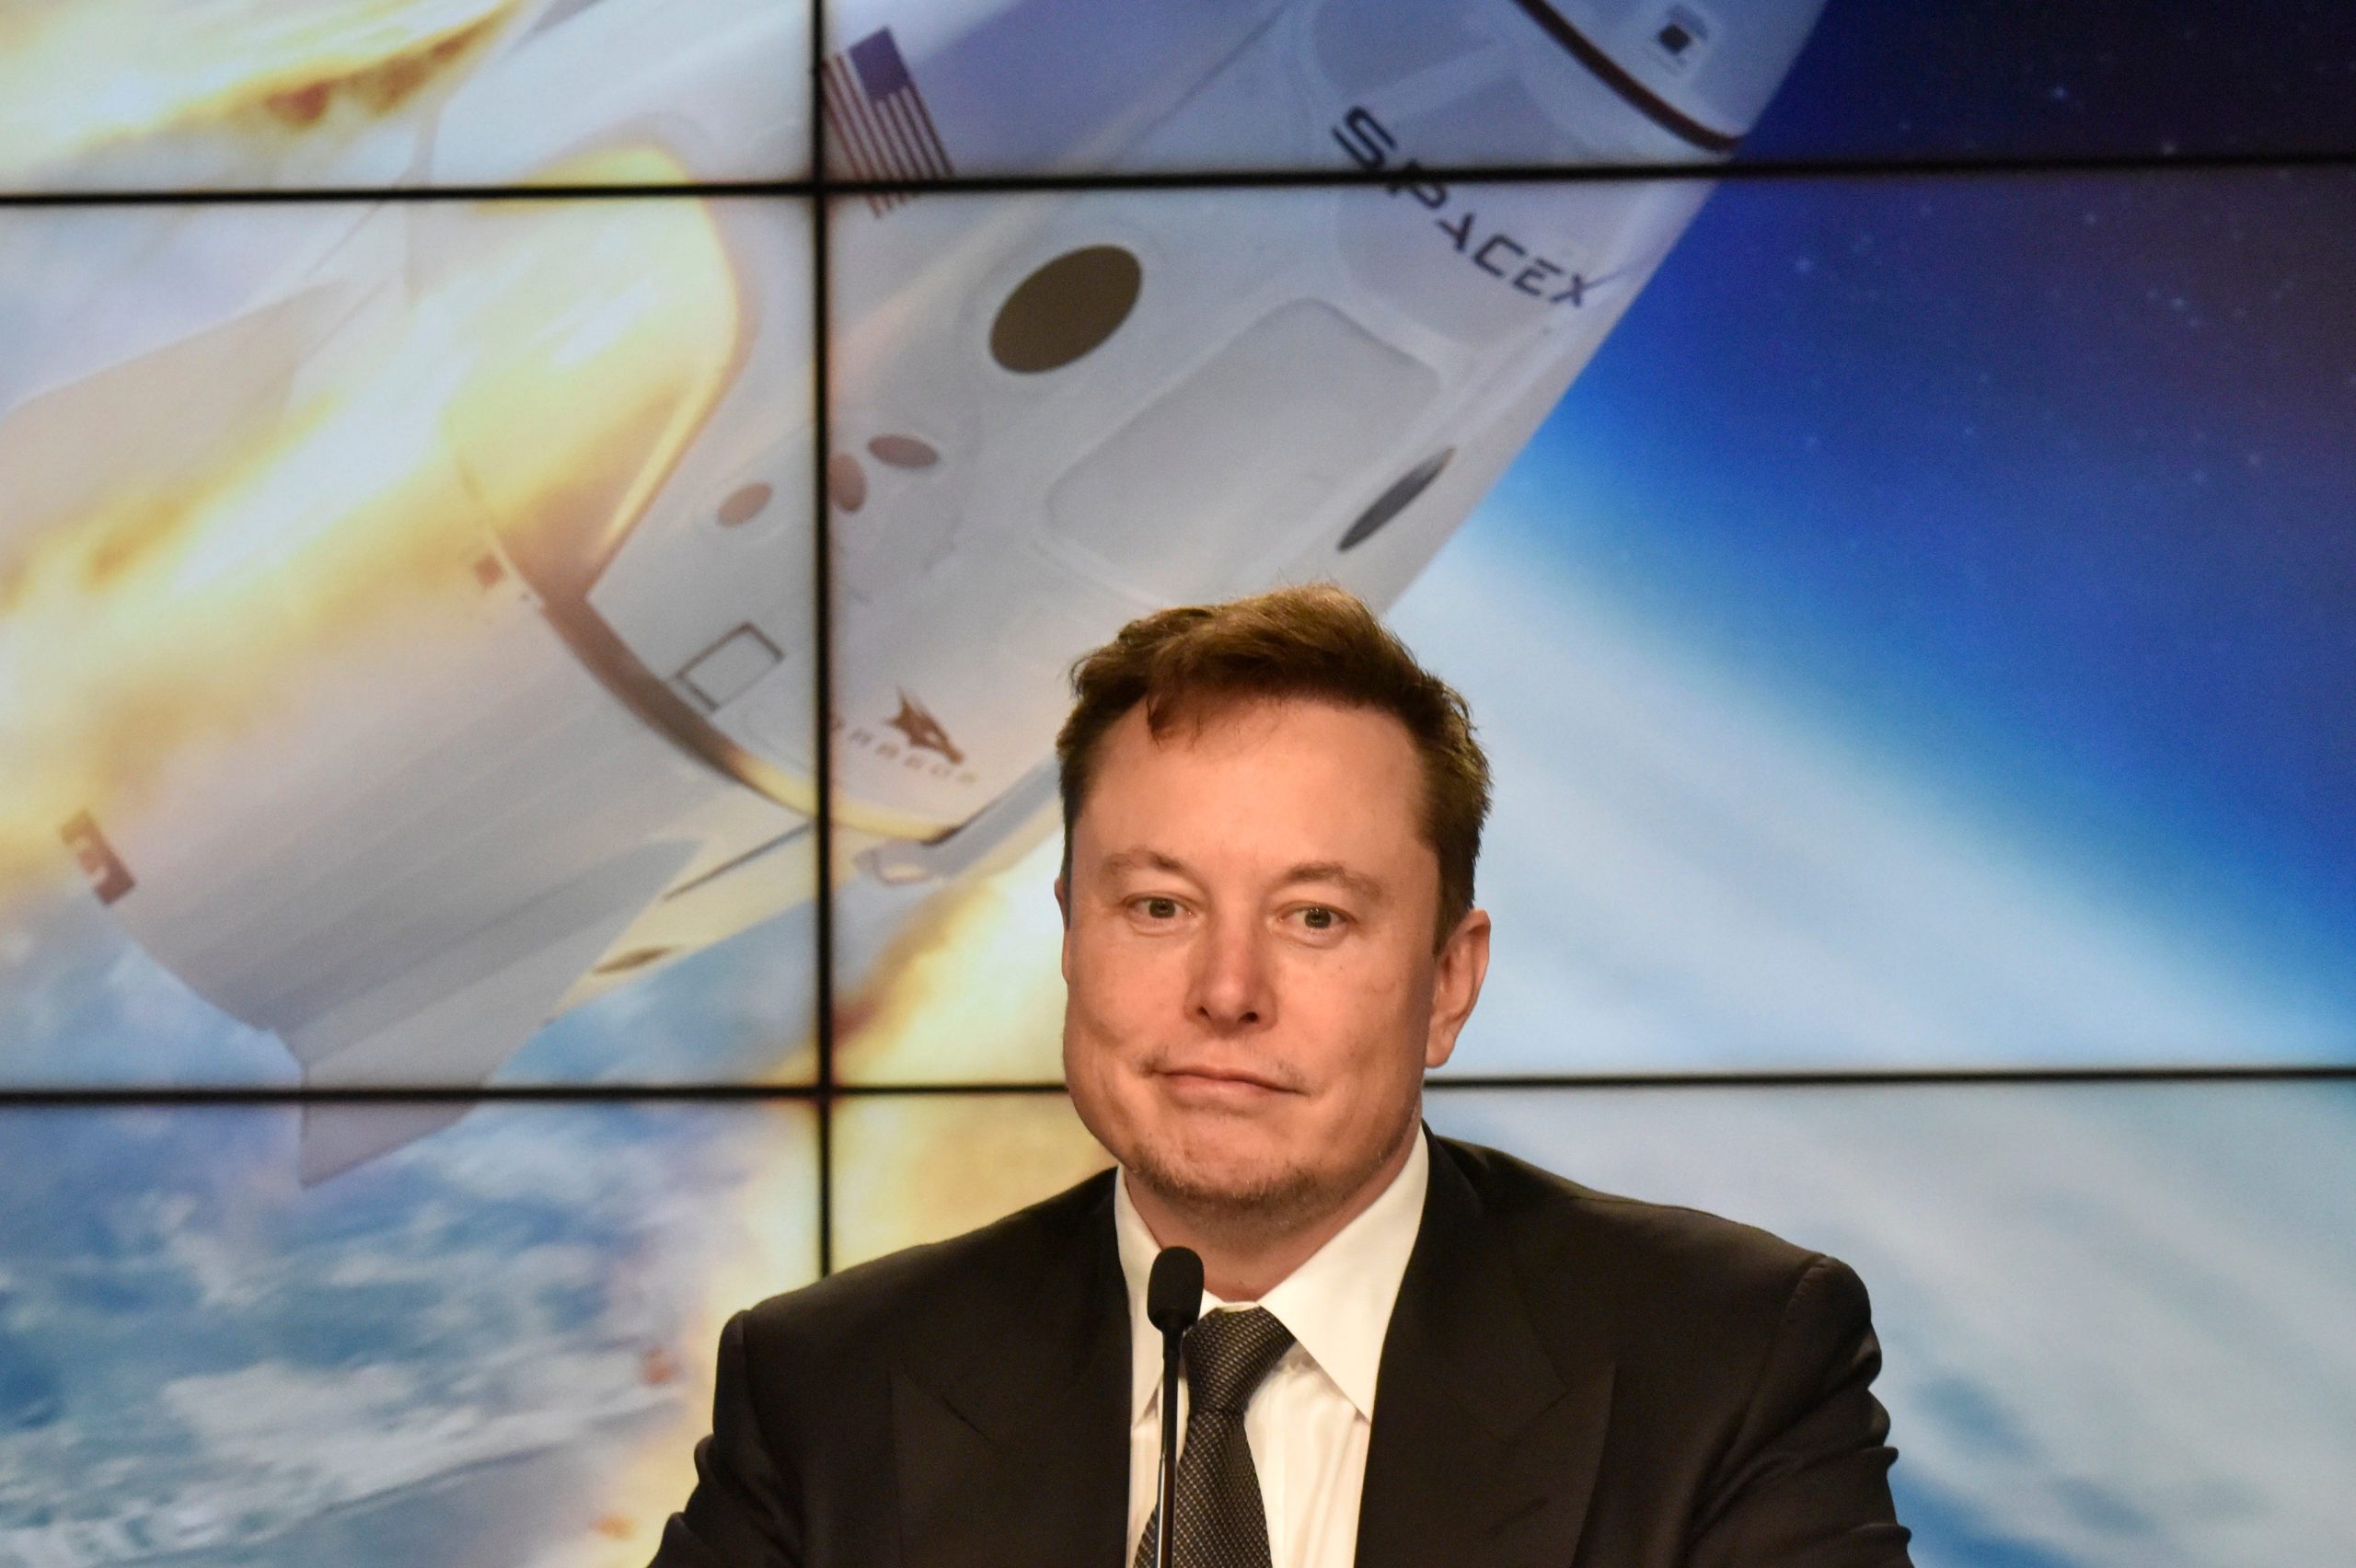 FILE PHOTO: SpaceX founder and chief engineer Elon Musk attends a post-launch news conference to discuss the  SpaceX Crew Dragon astronaut capsule in-flight abort test at the Kennedy Space Center in Cape Canaveral, Florida, U.S. January 19, 2020. REUTERS/Steve Nesius